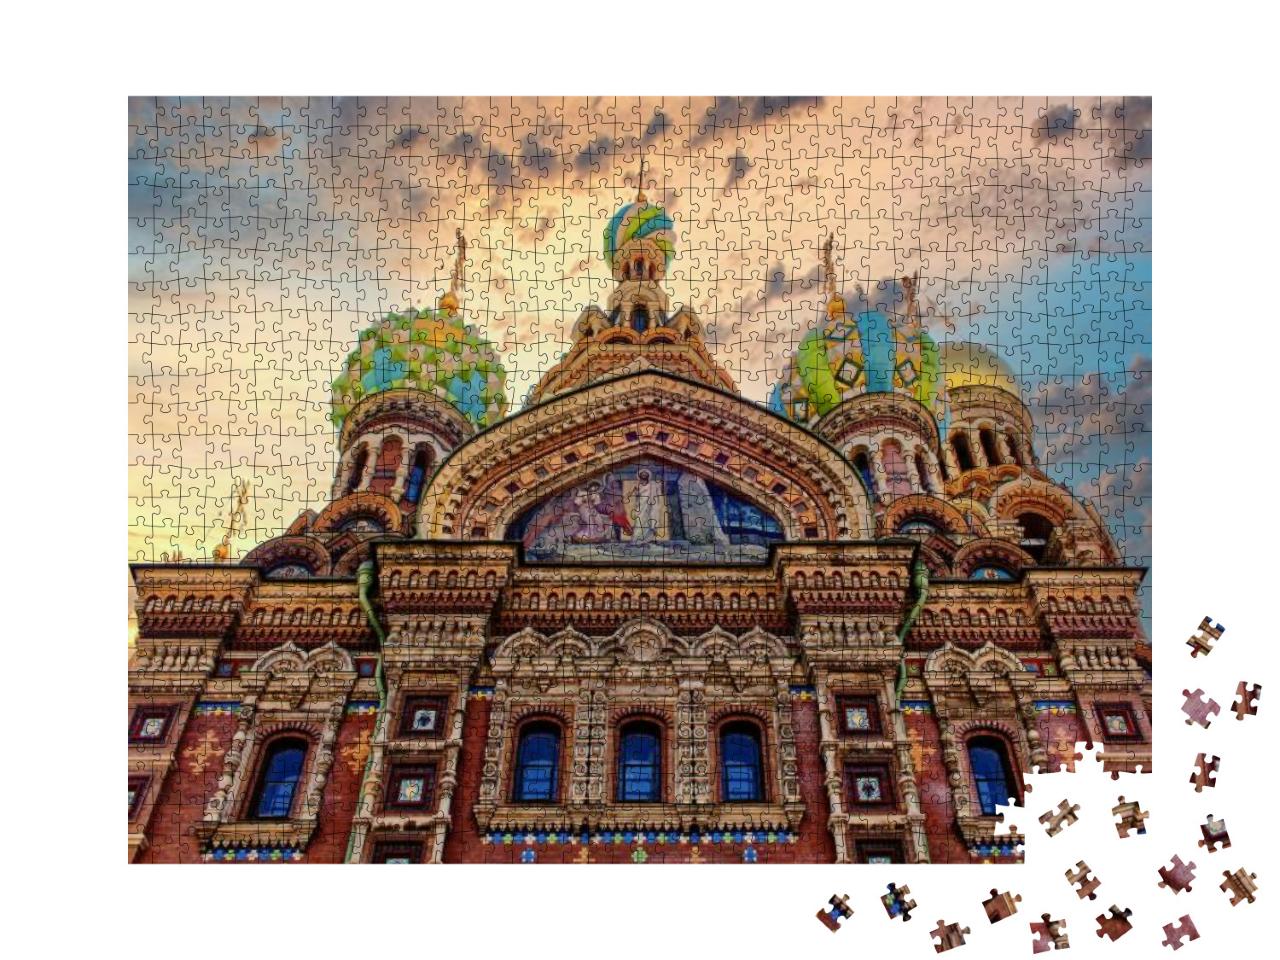 Facade Church of the Savior on Spilled Blood, St. Petersb... Jigsaw Puzzle with 1000 pieces